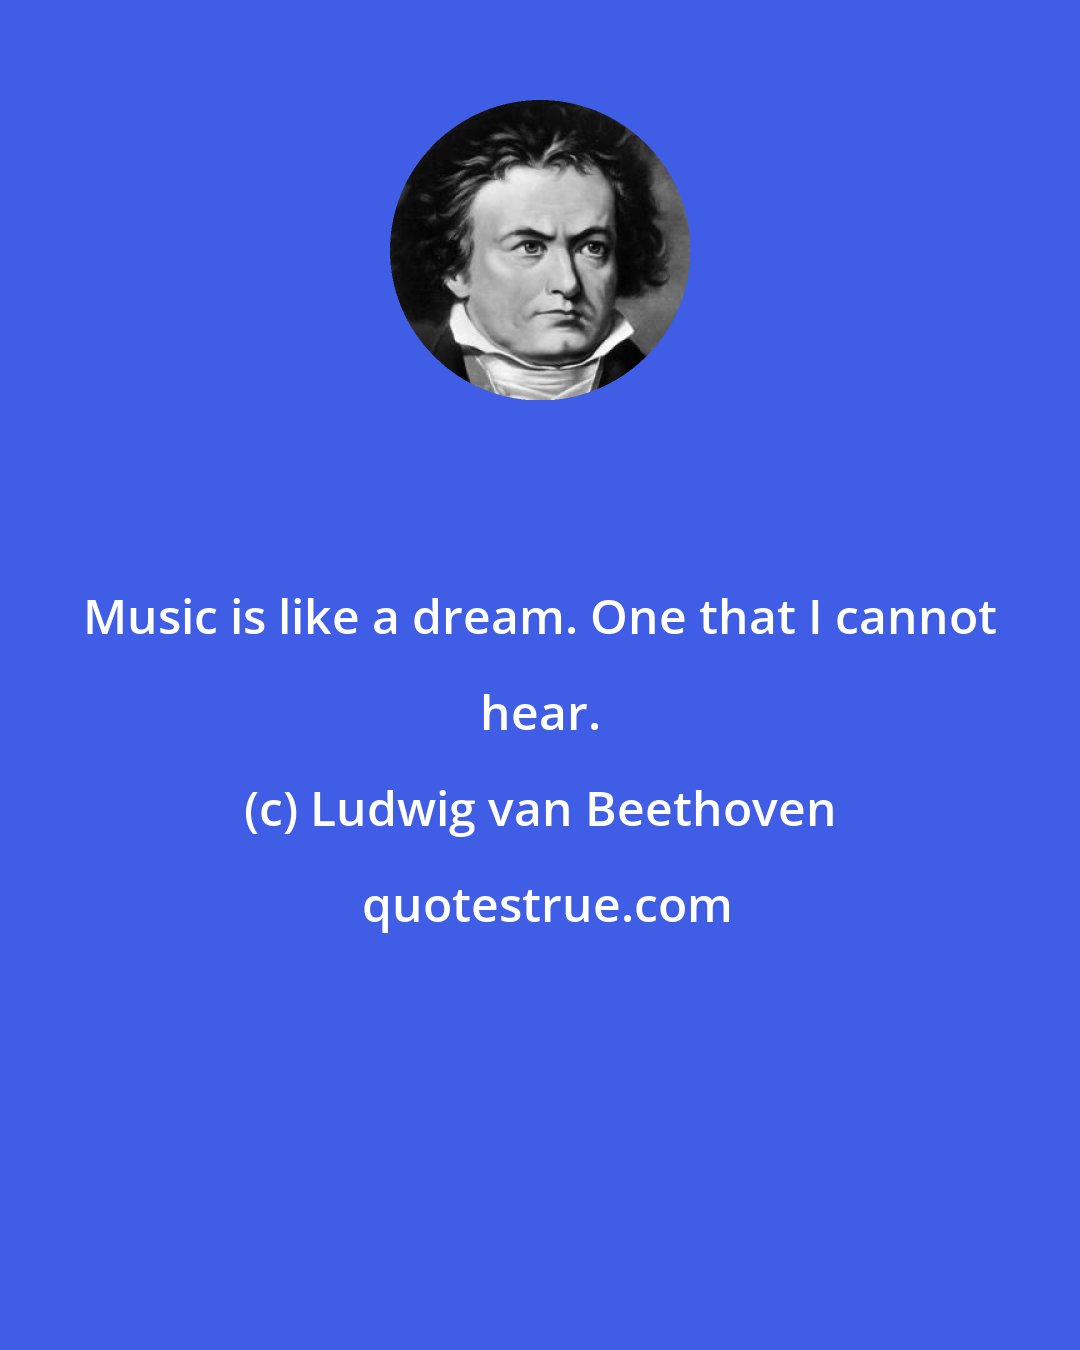 Ludwig van Beethoven: Music is like a dream. One that I cannot hear.